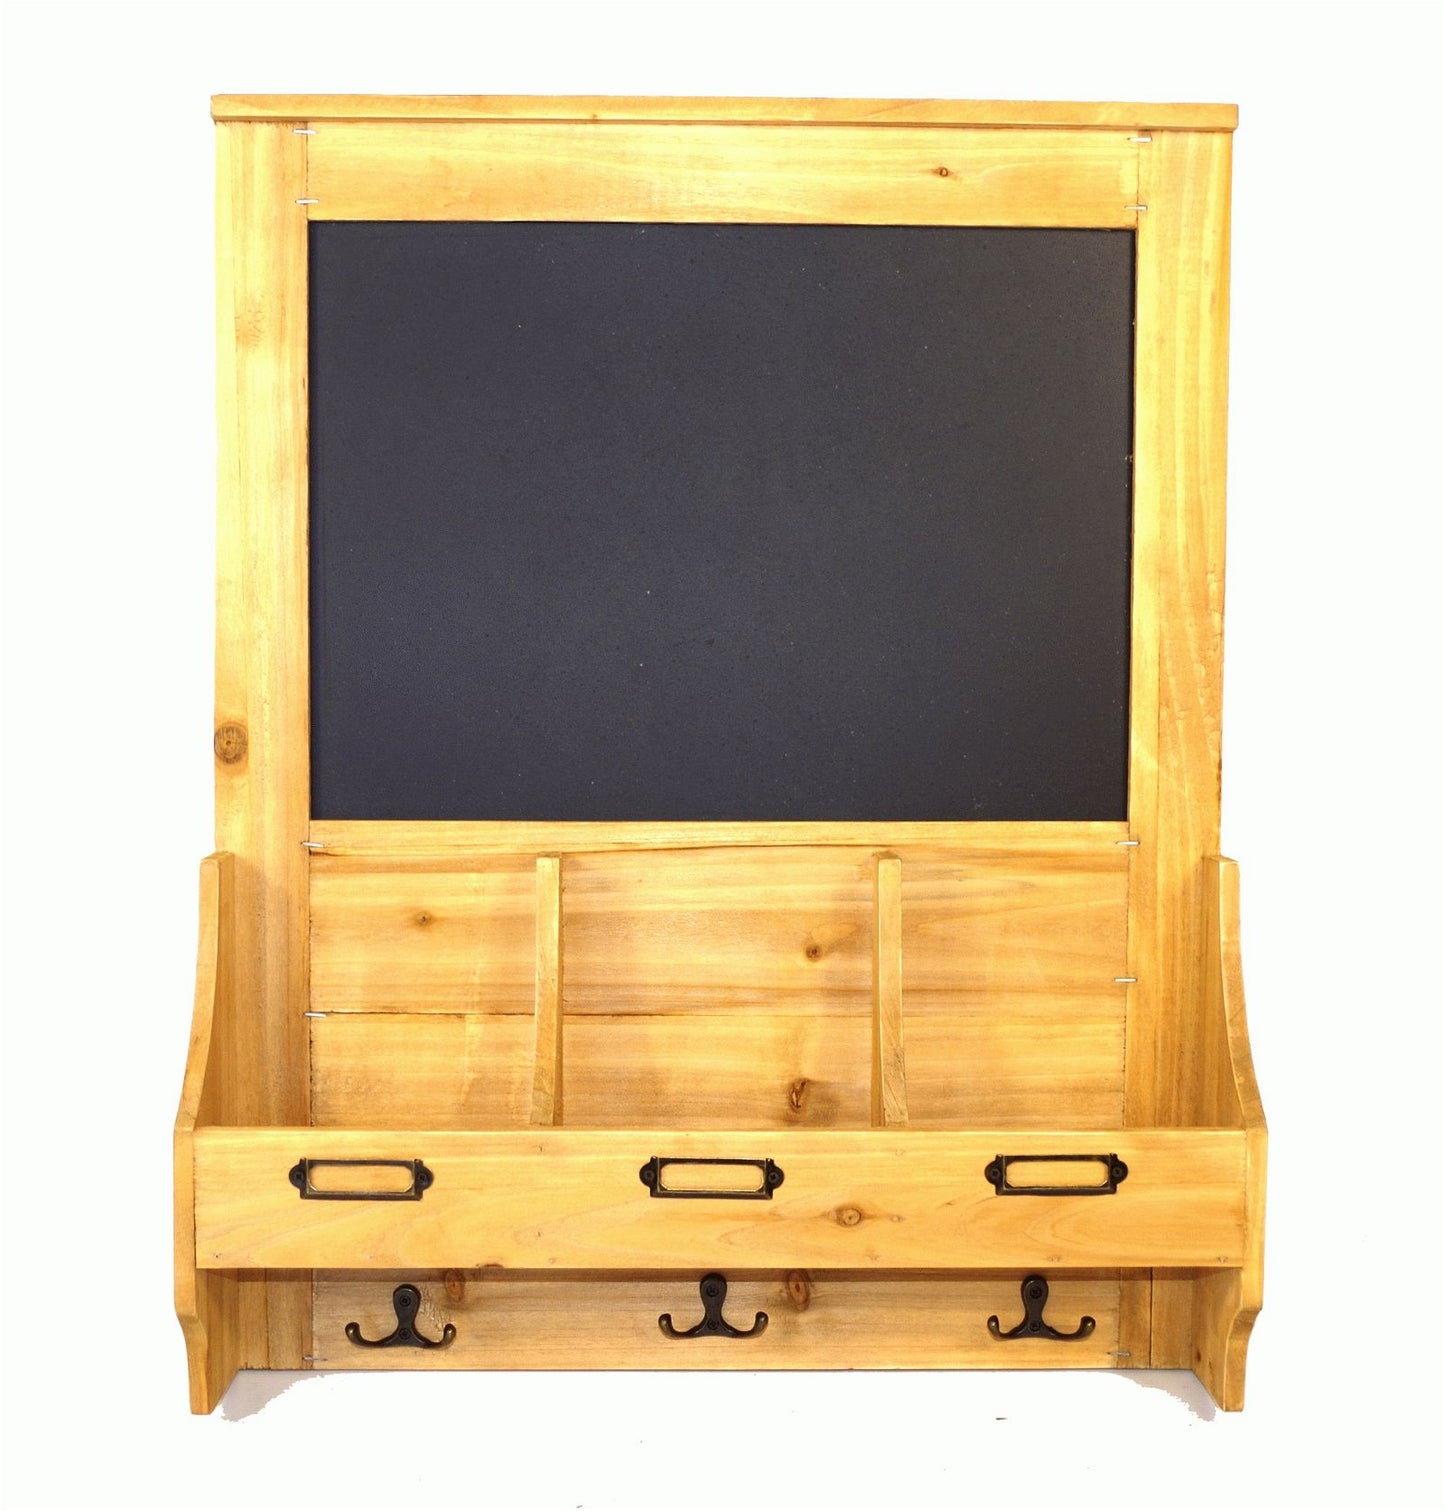 Chalkboard with hooks and Post Space 47 x 10 x 59cm